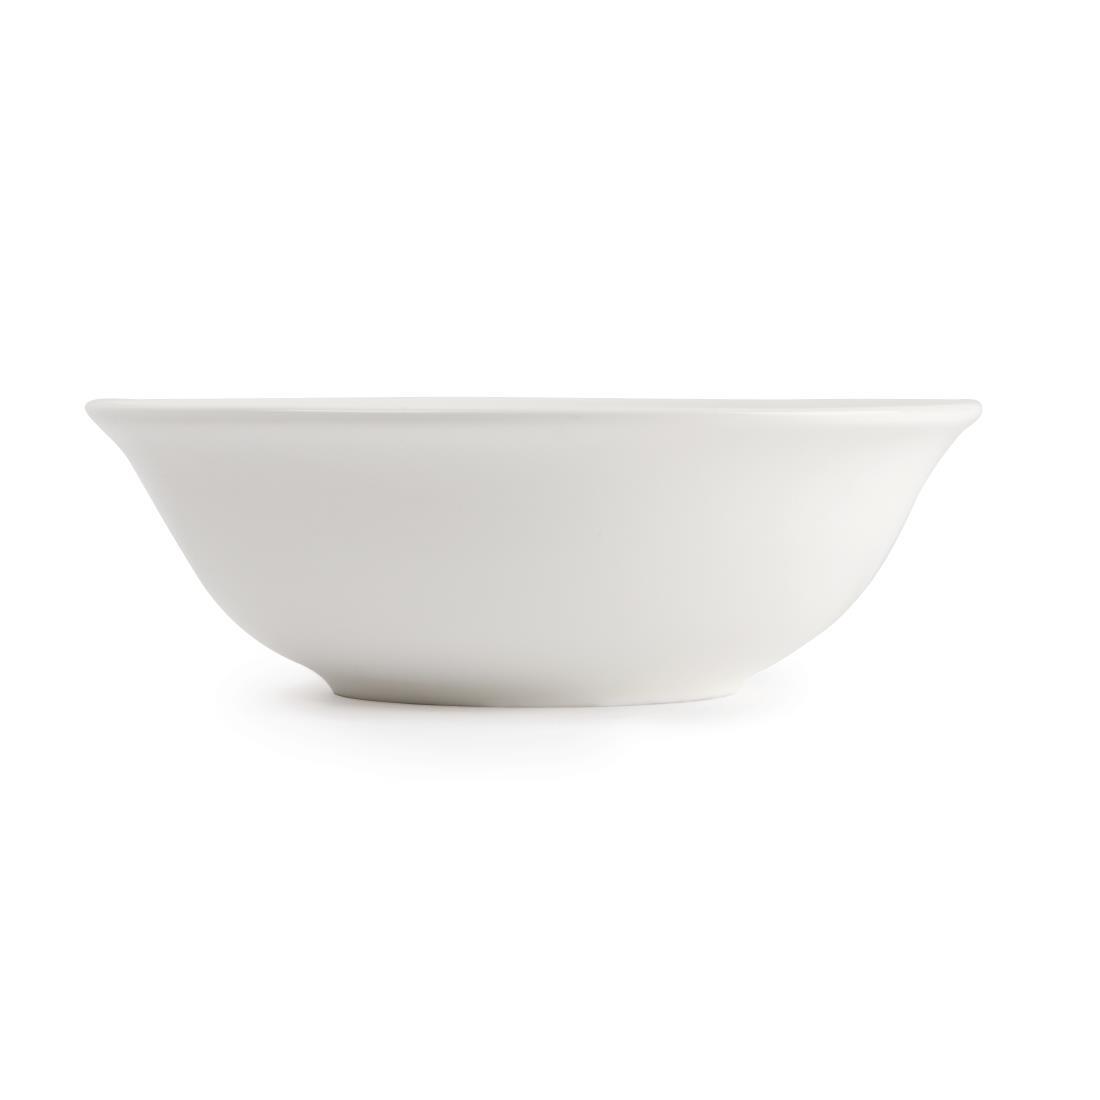 Olympia Lumina Cereal Bowls 160mm (Pack of 6) - CD638  - 3